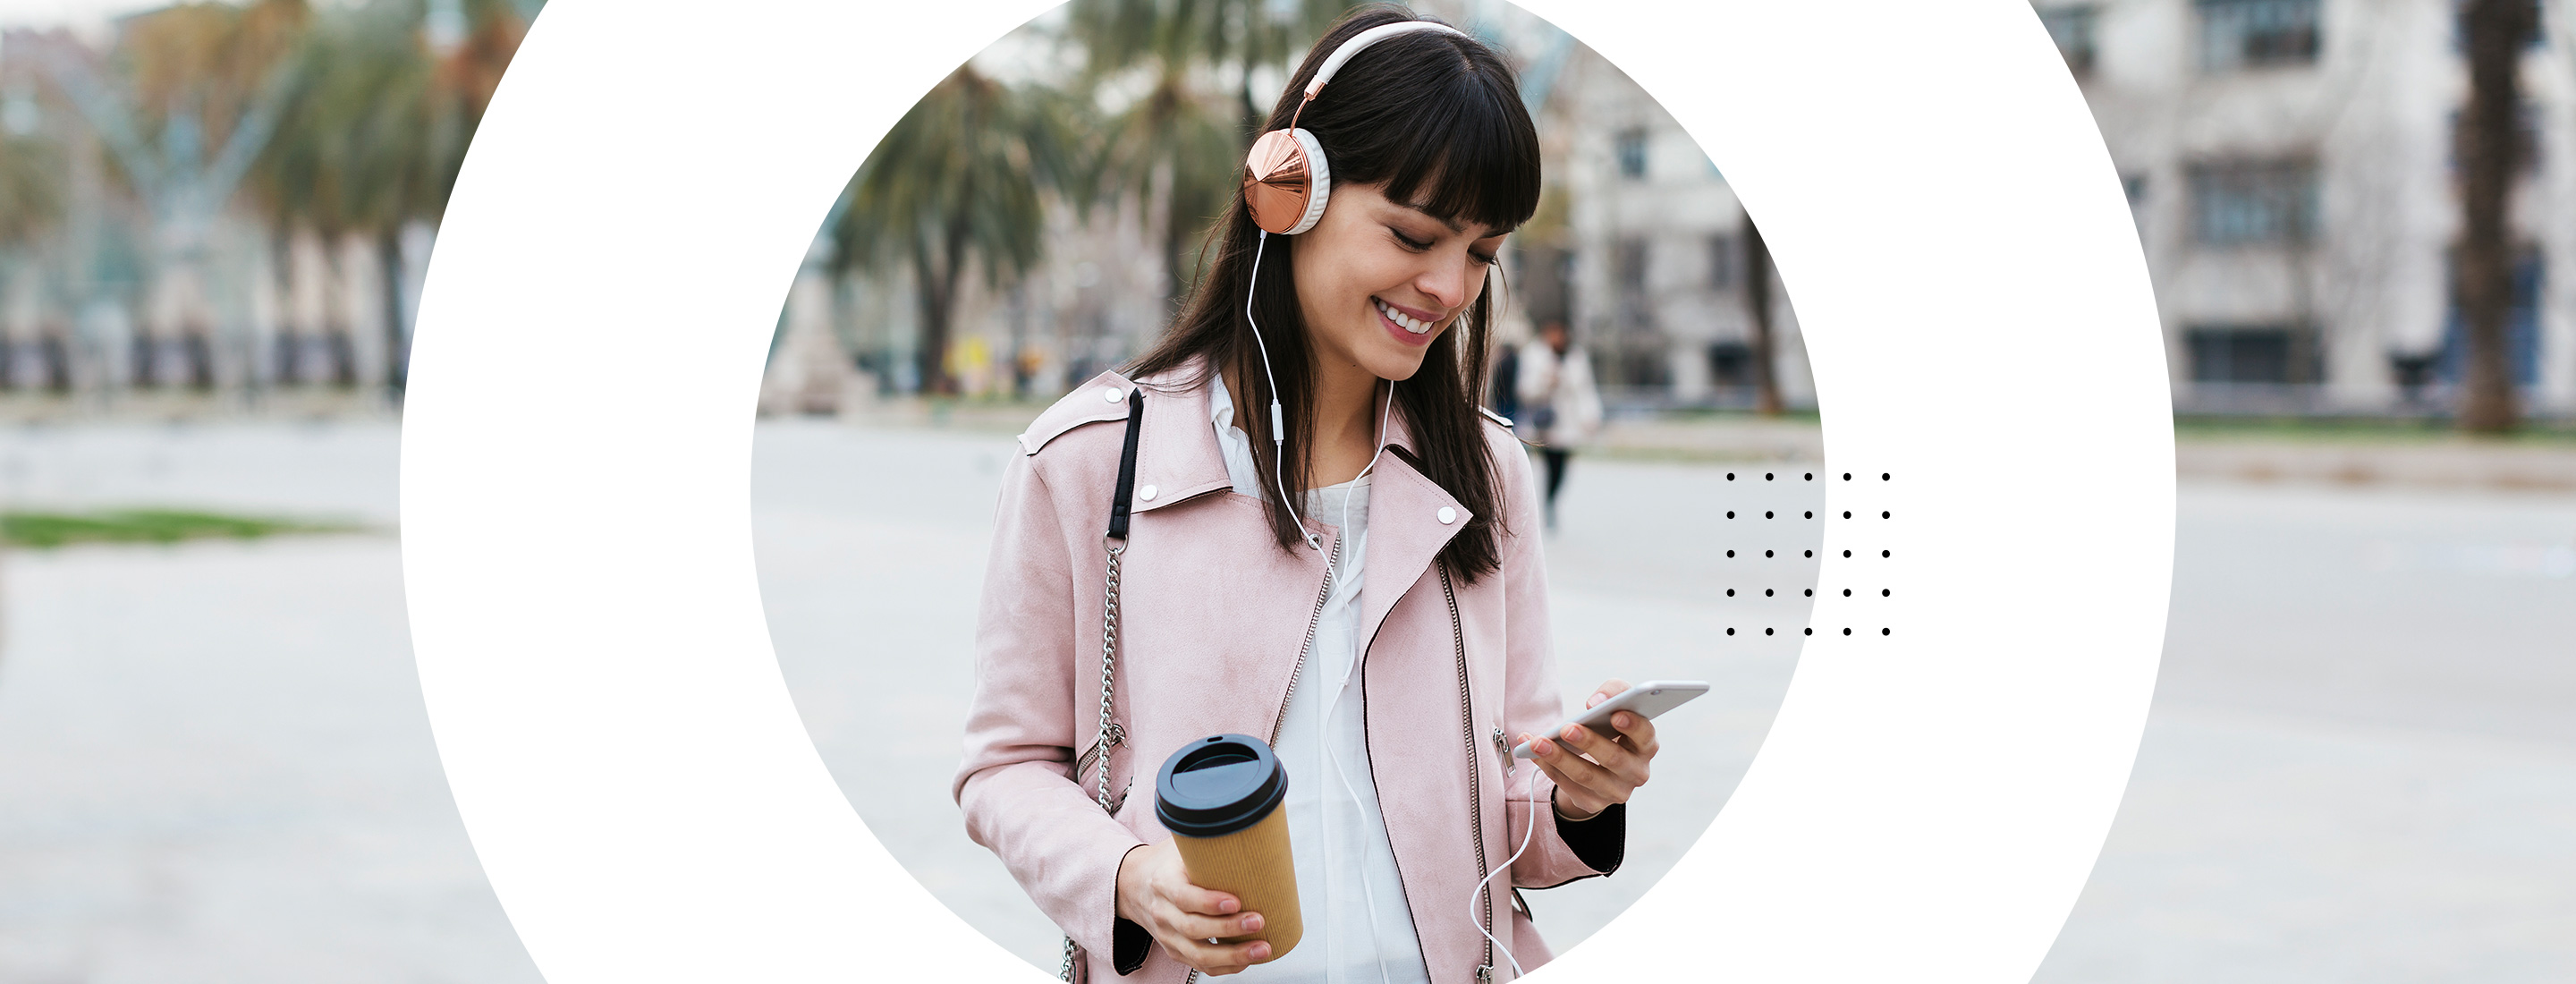 Millenial woman with phone, coffee and headphones